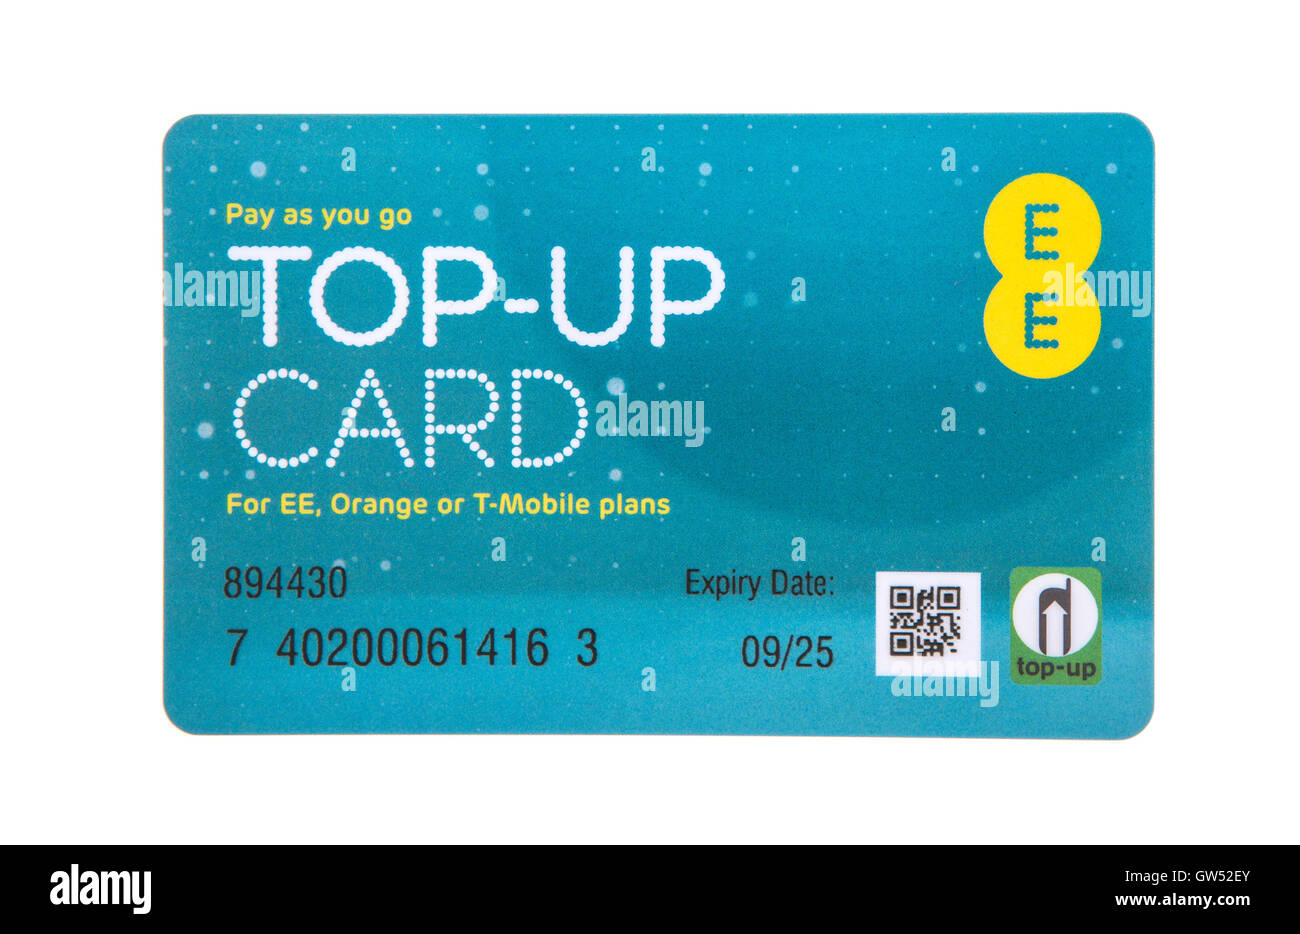 EE Pay as you go top-up card for EE, Orange or T-Mobile Services Stock Photo